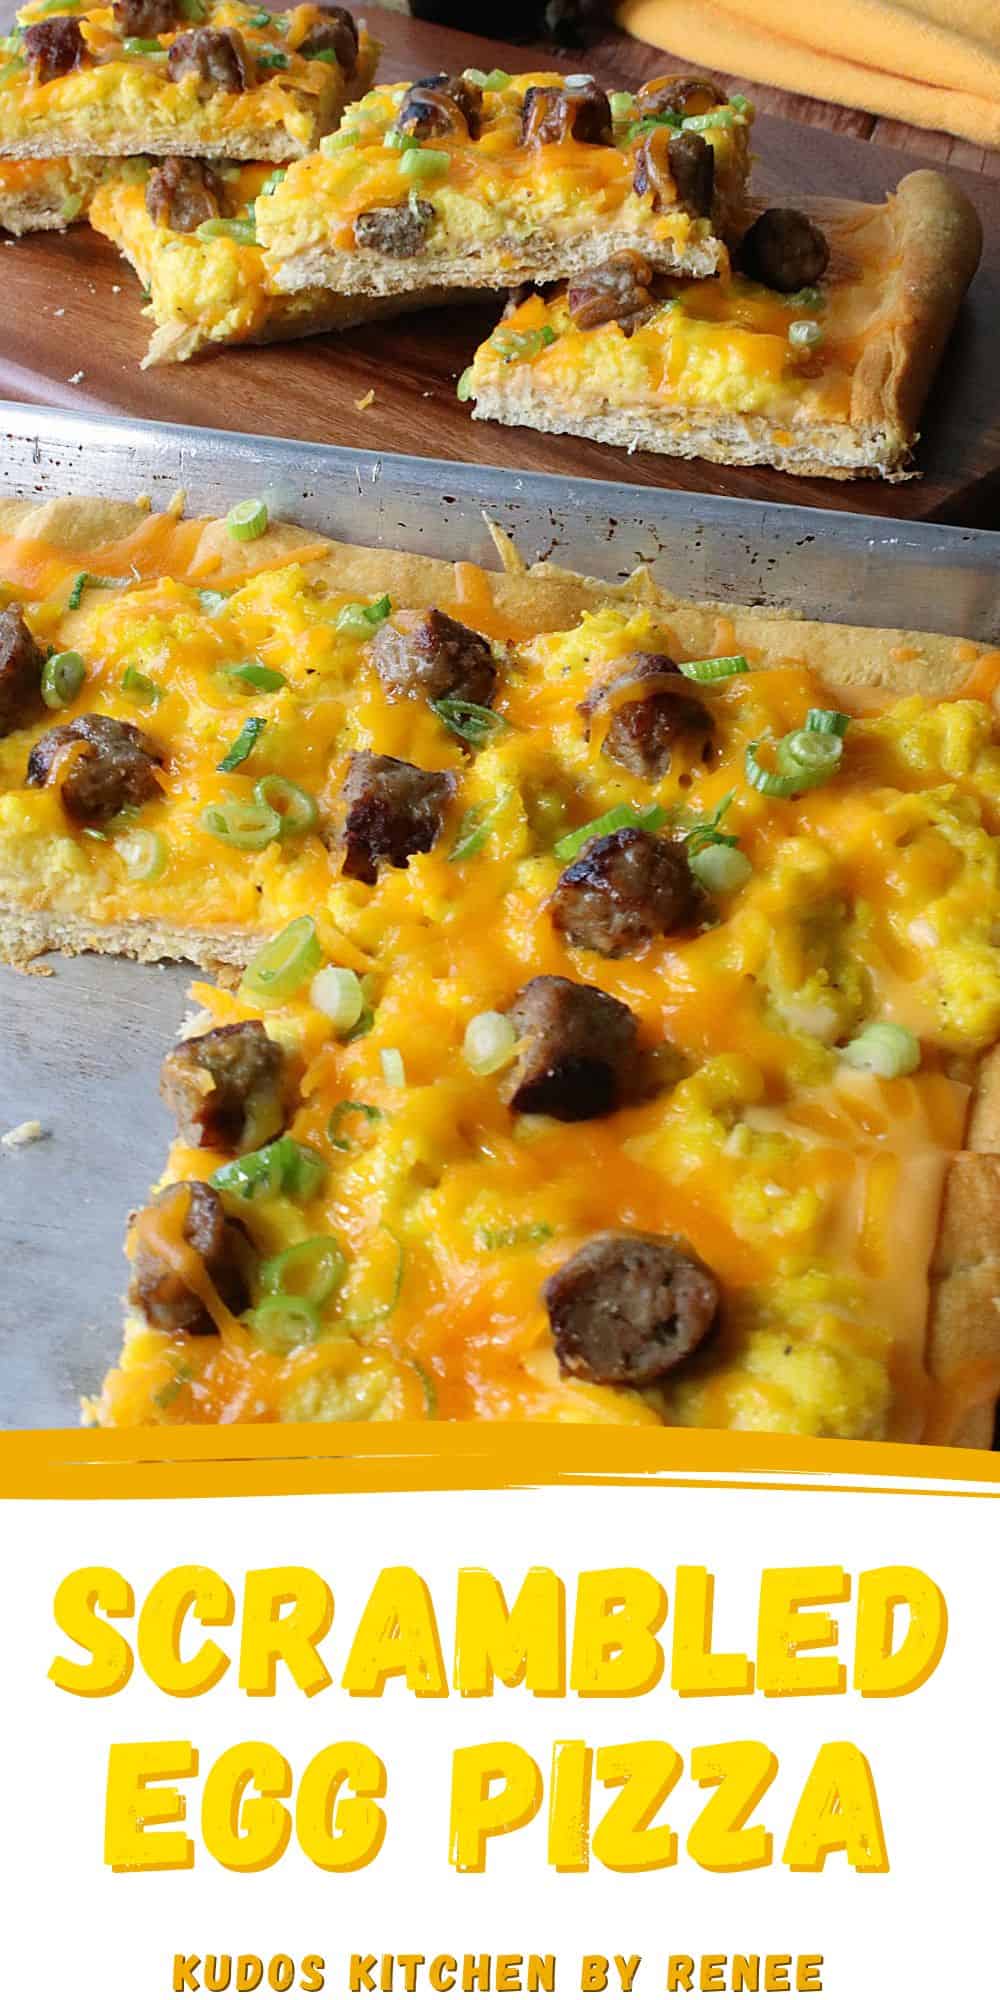 A Scrambled Egg Pizza on a baking sheet along with some slices on a wooden board.